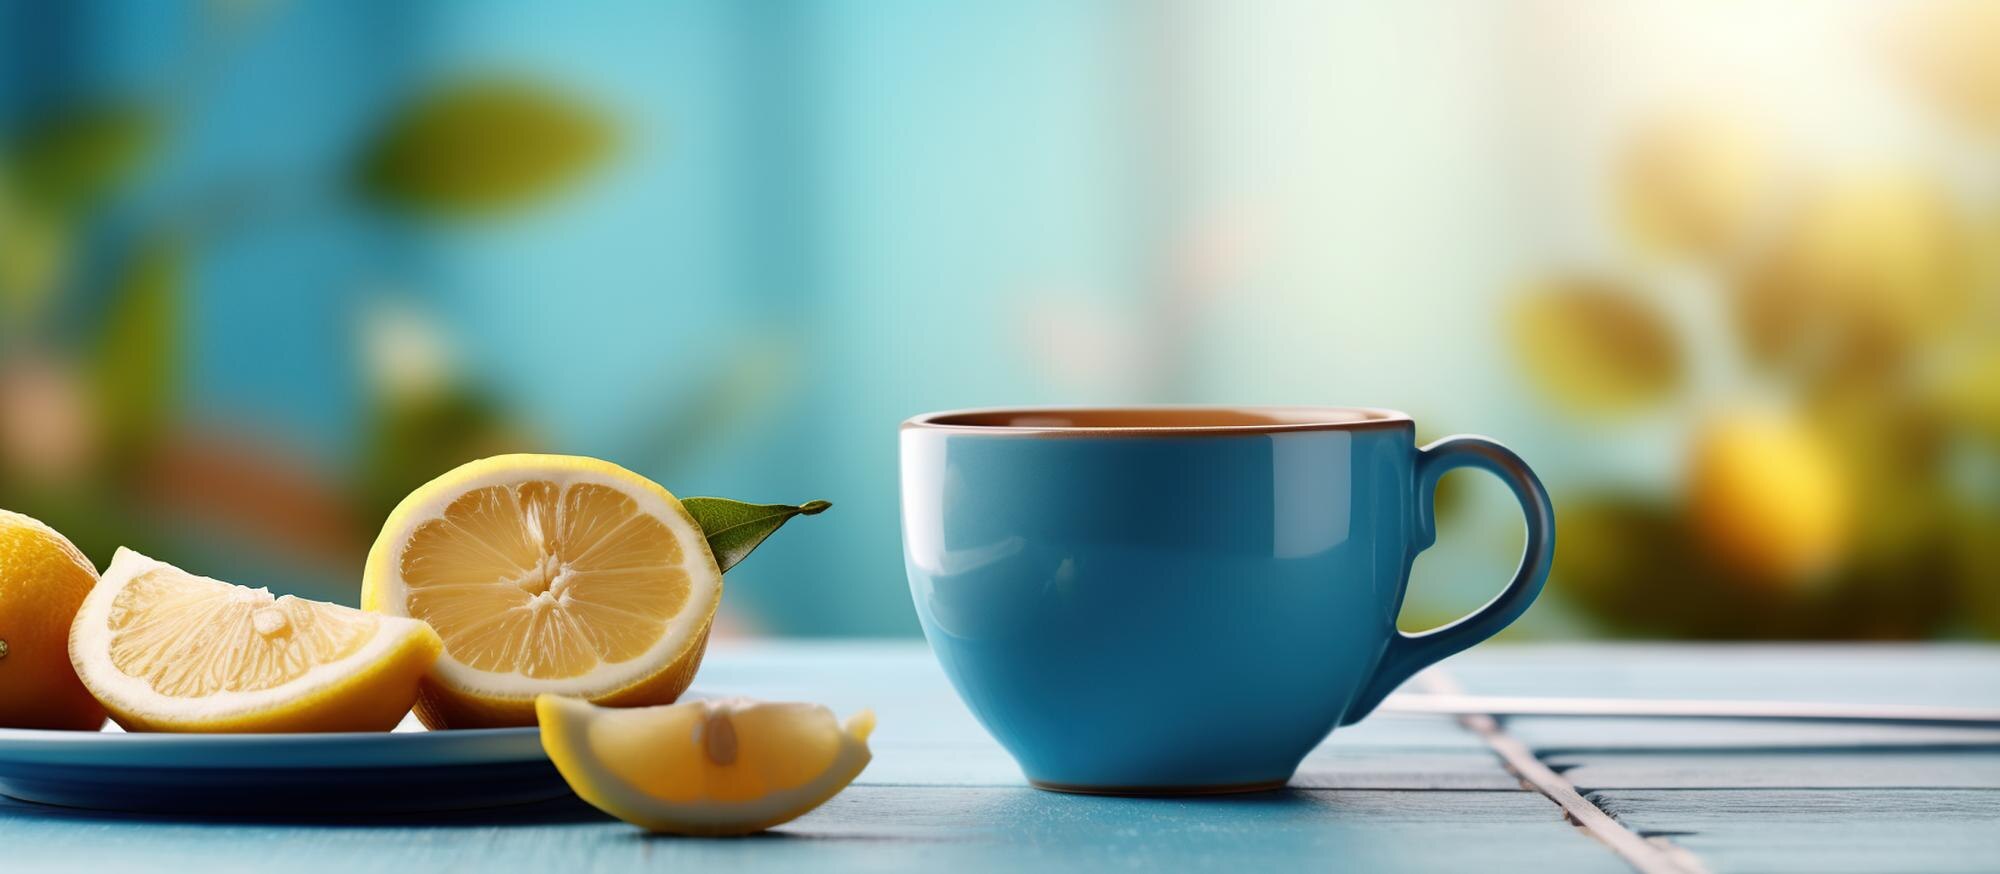 cup-of-tea-with-a-slice-of-lemon-ai-generated-image_587448-1445.jpg